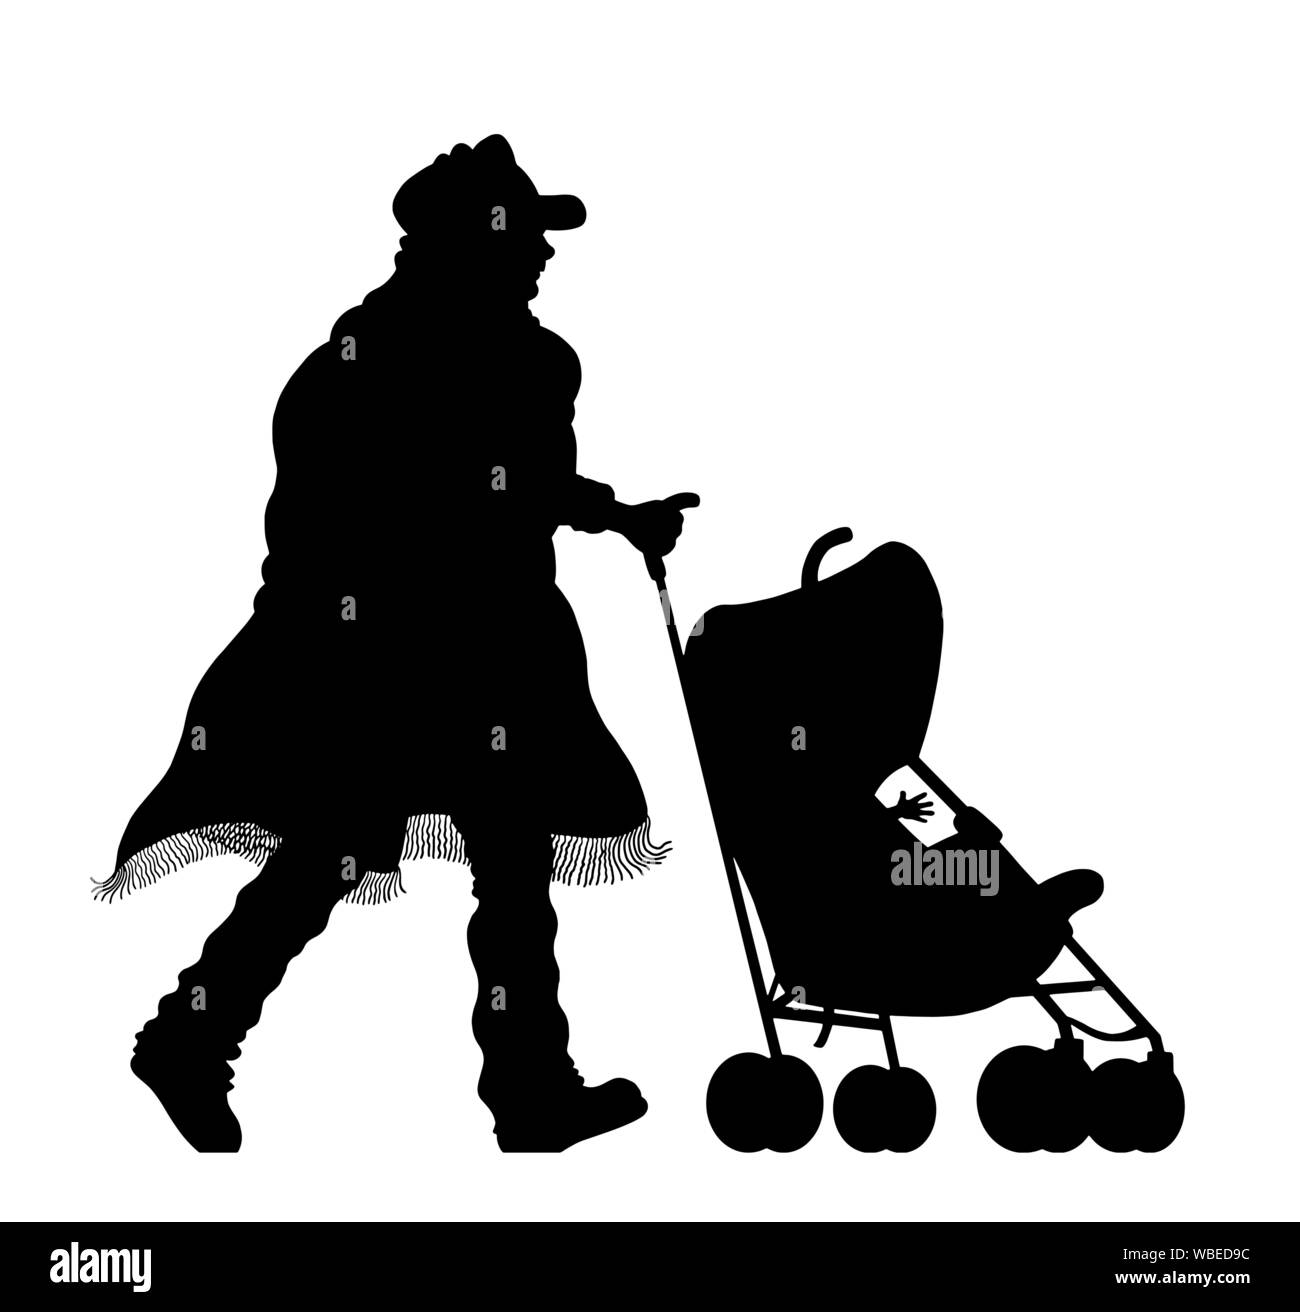 Immigrant man silhouette with stroller and baby. The silhouette objects and background are in different layers. Stock Vector